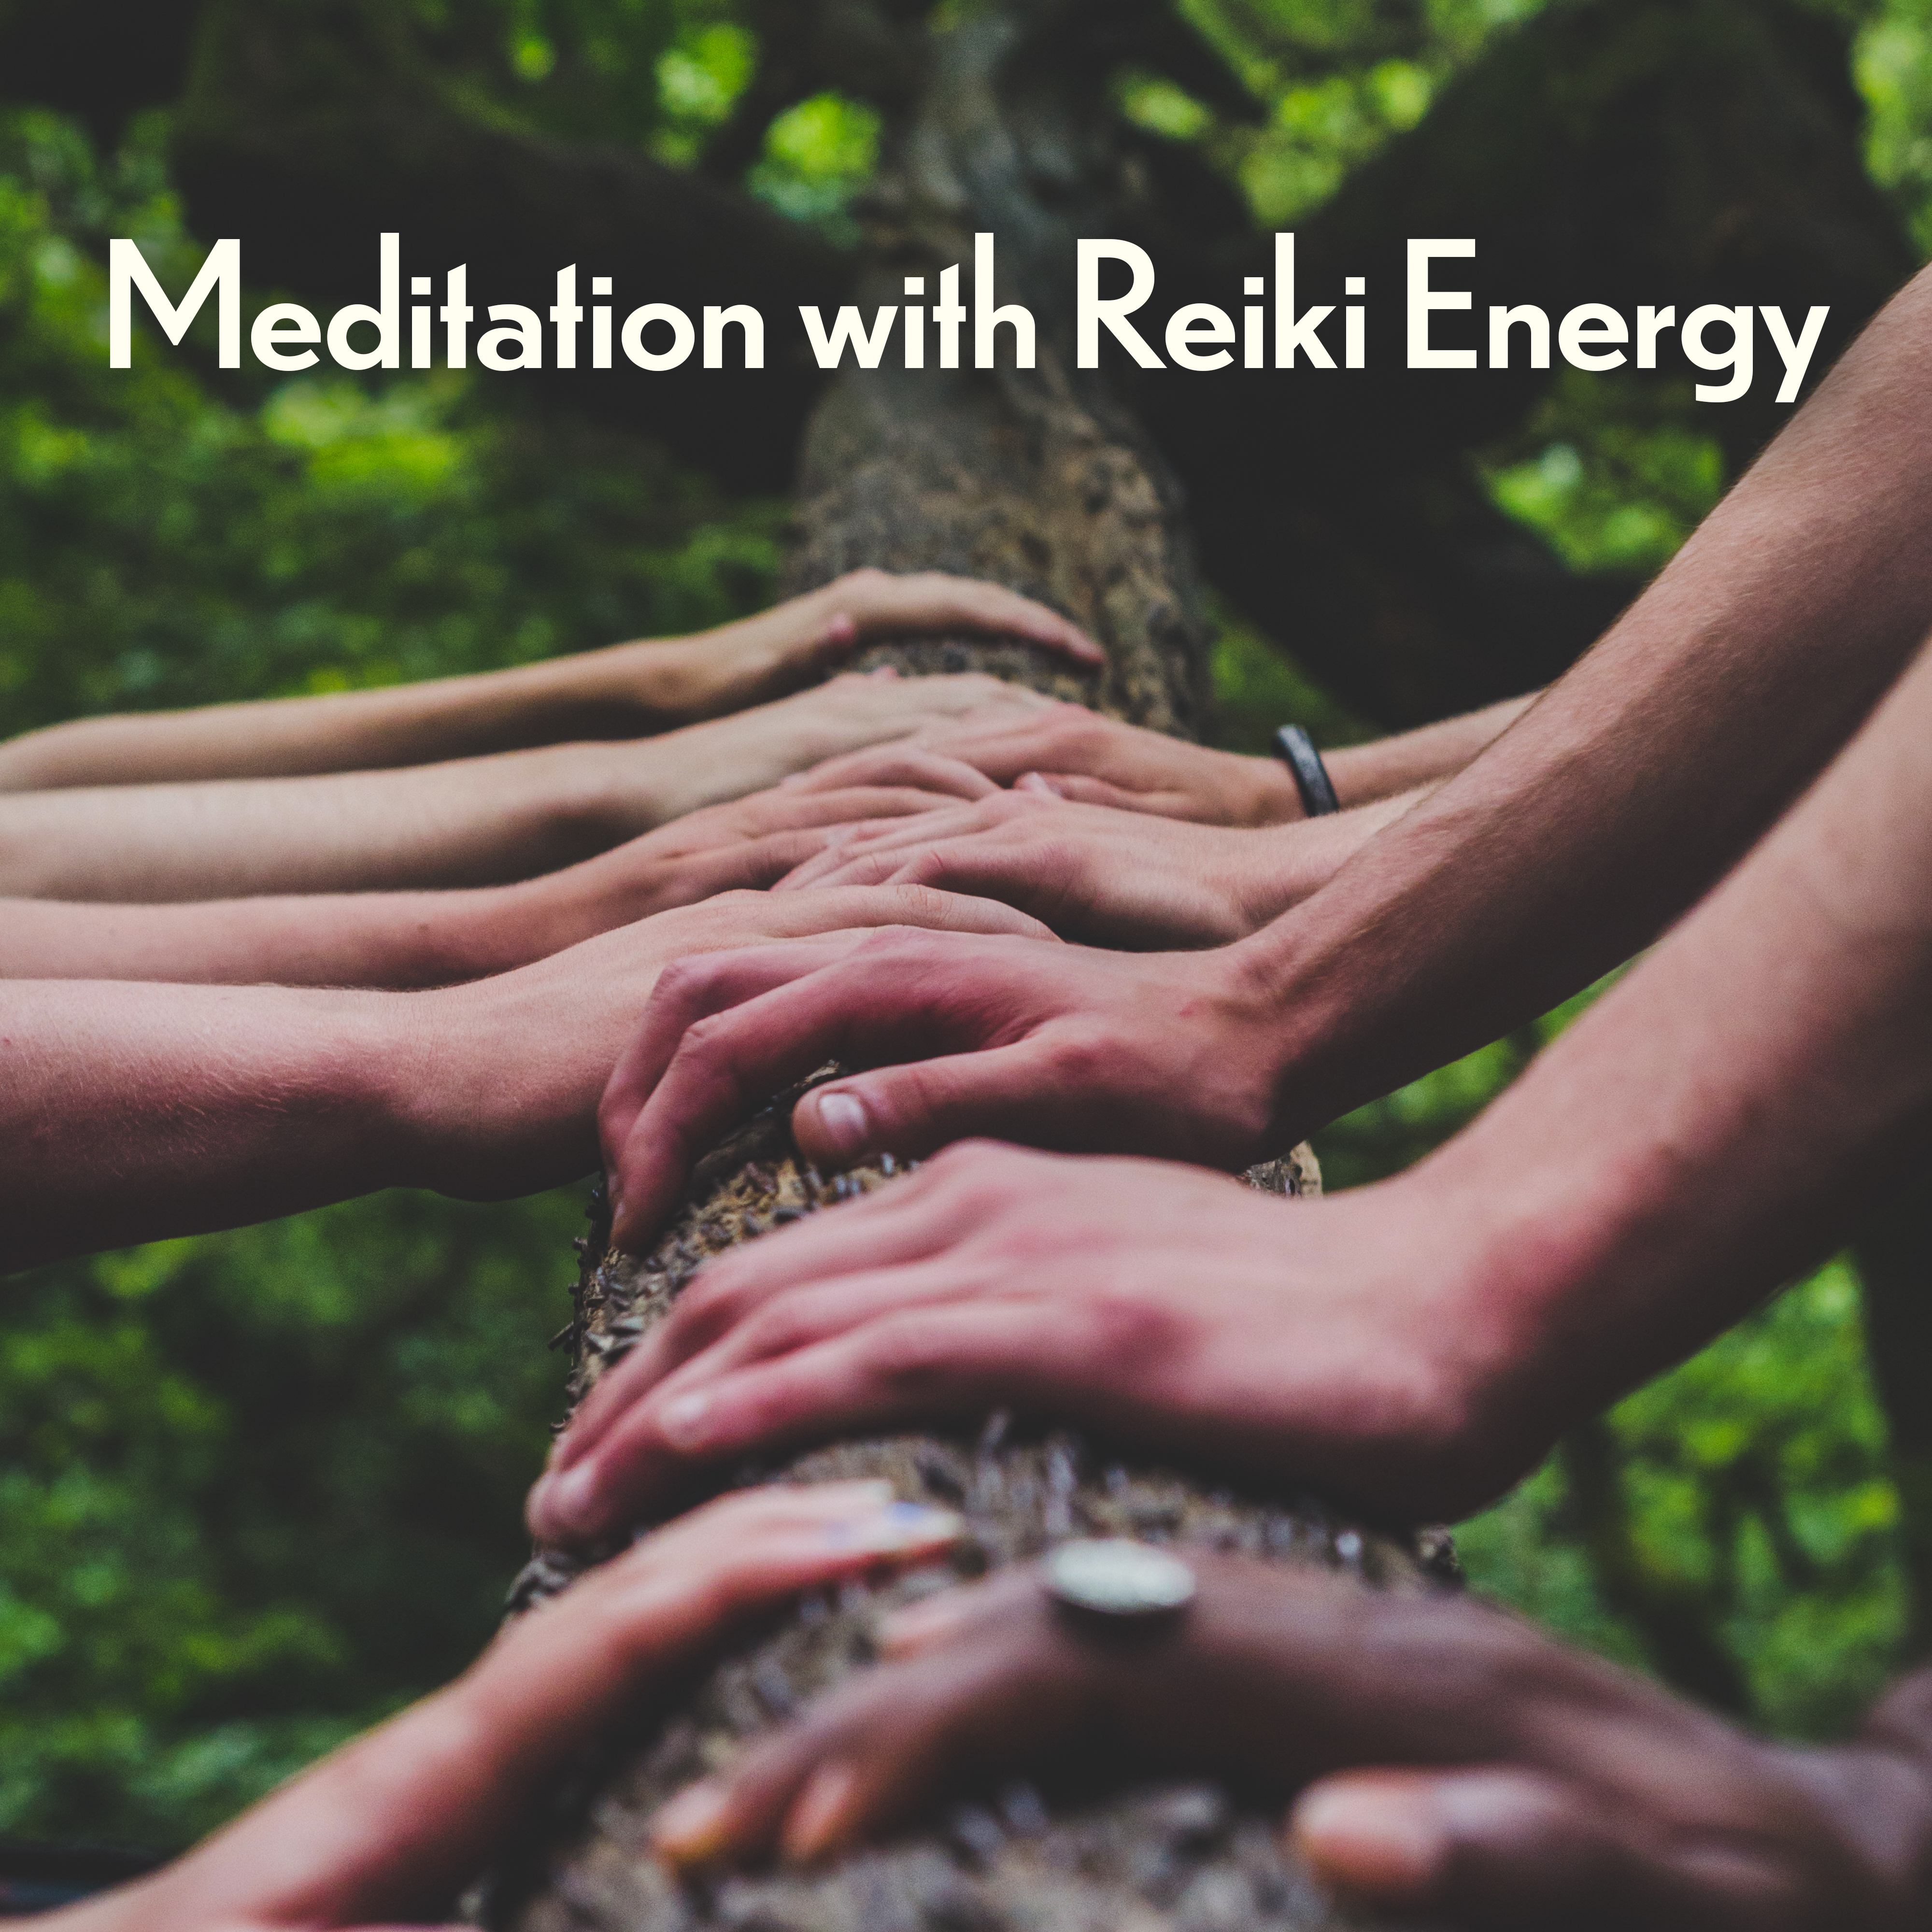 Meditation with Reiki Energy - Meditative Music for Treatment, Meditation and Purification of the Mind with the Help of Reiki